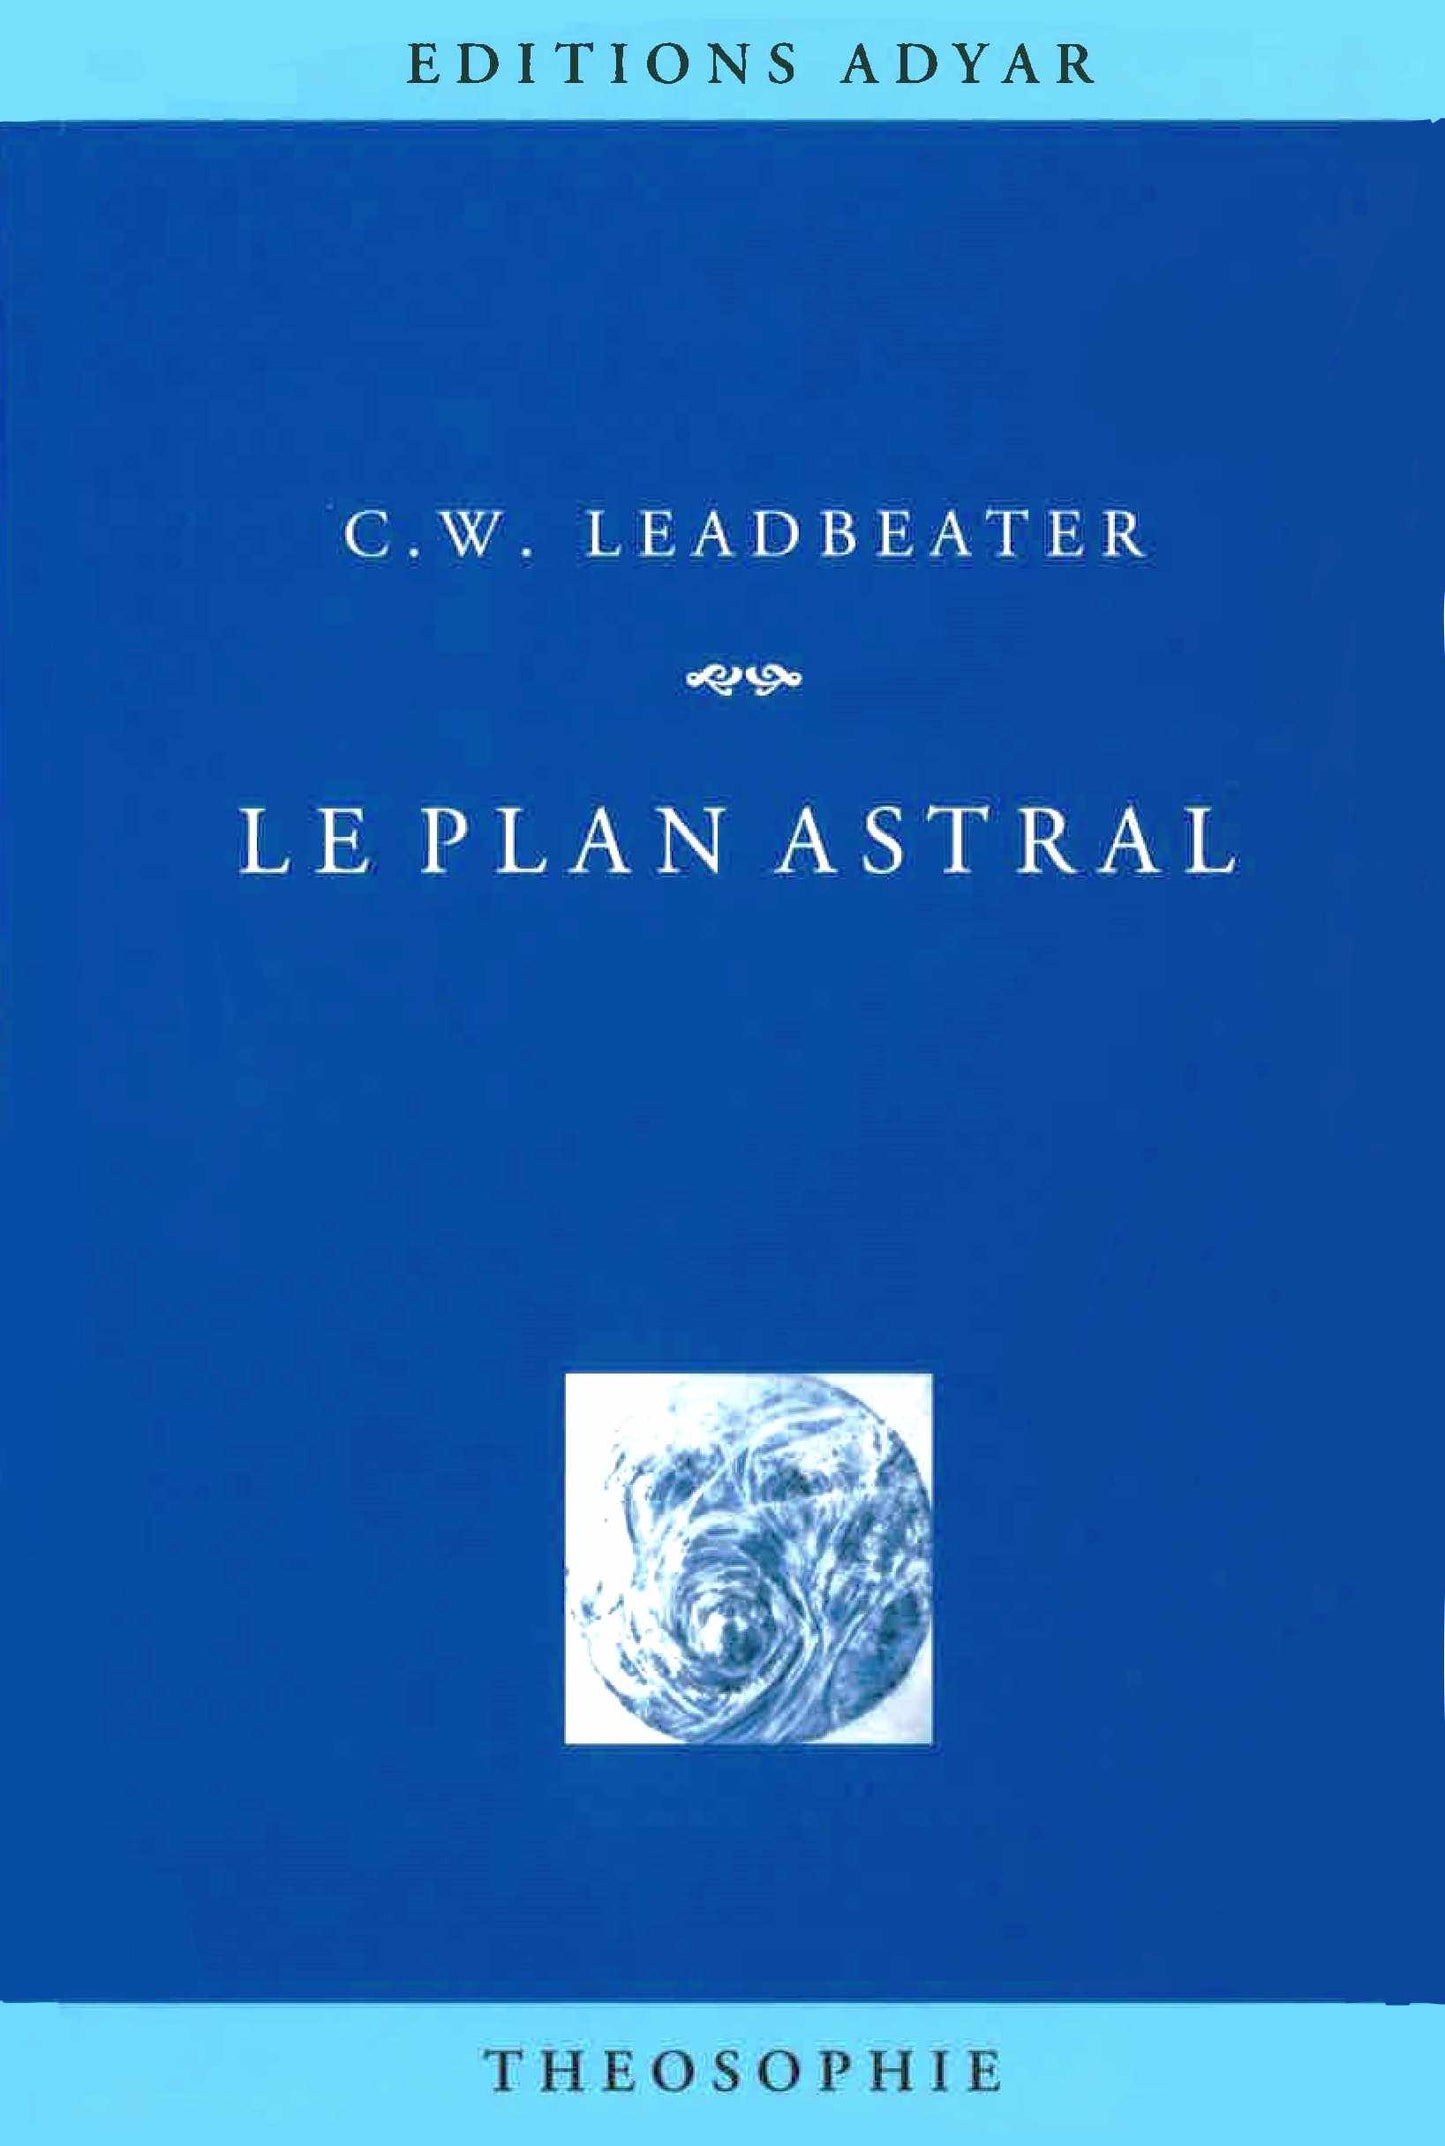 Le Plan astral